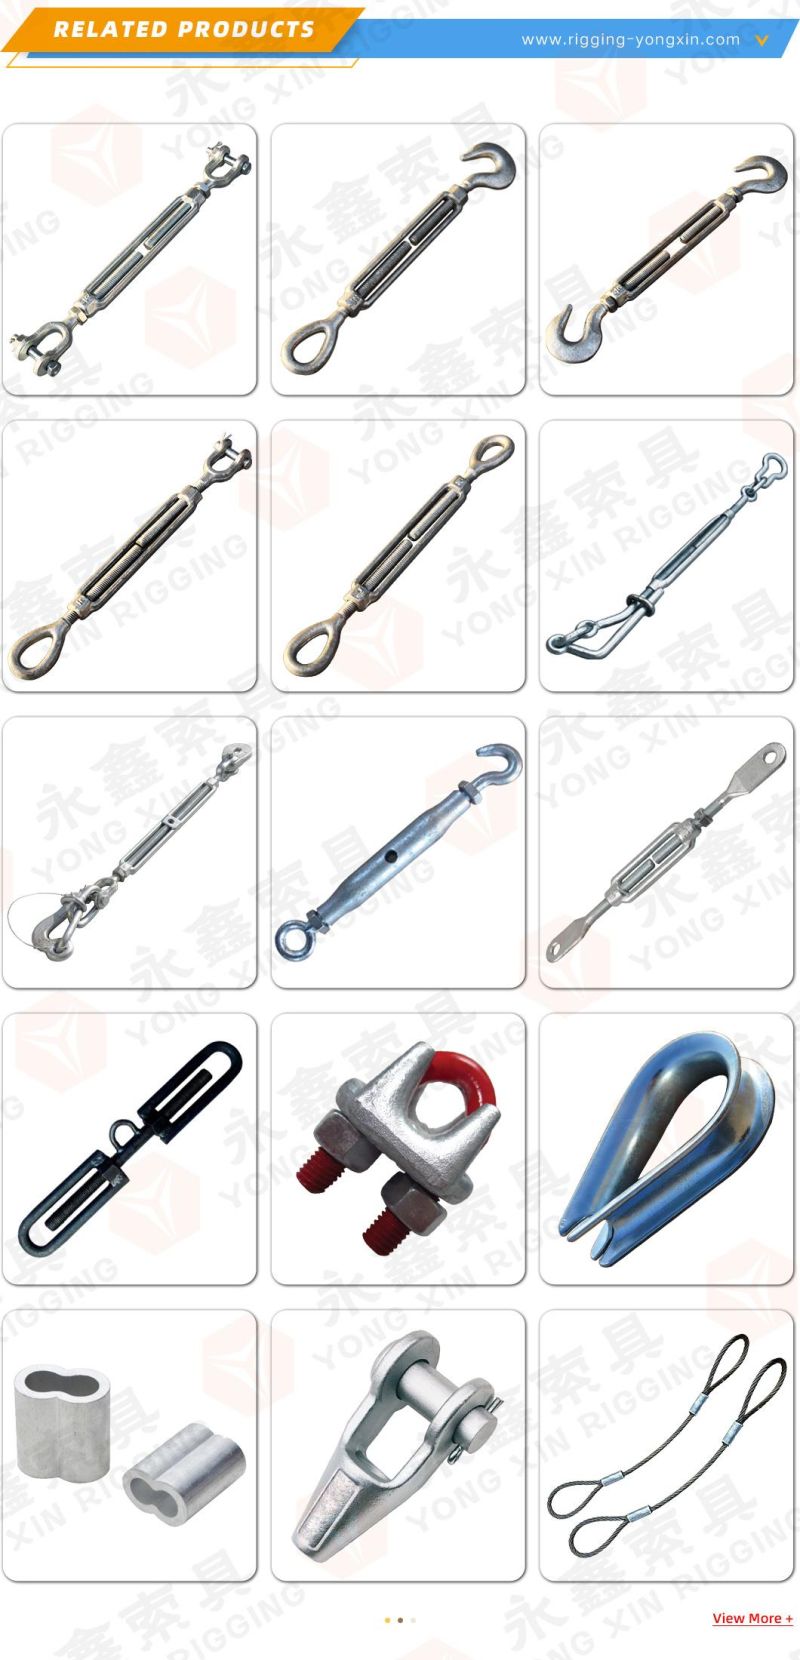 Us Type Turnbuckles with Hook and Hook